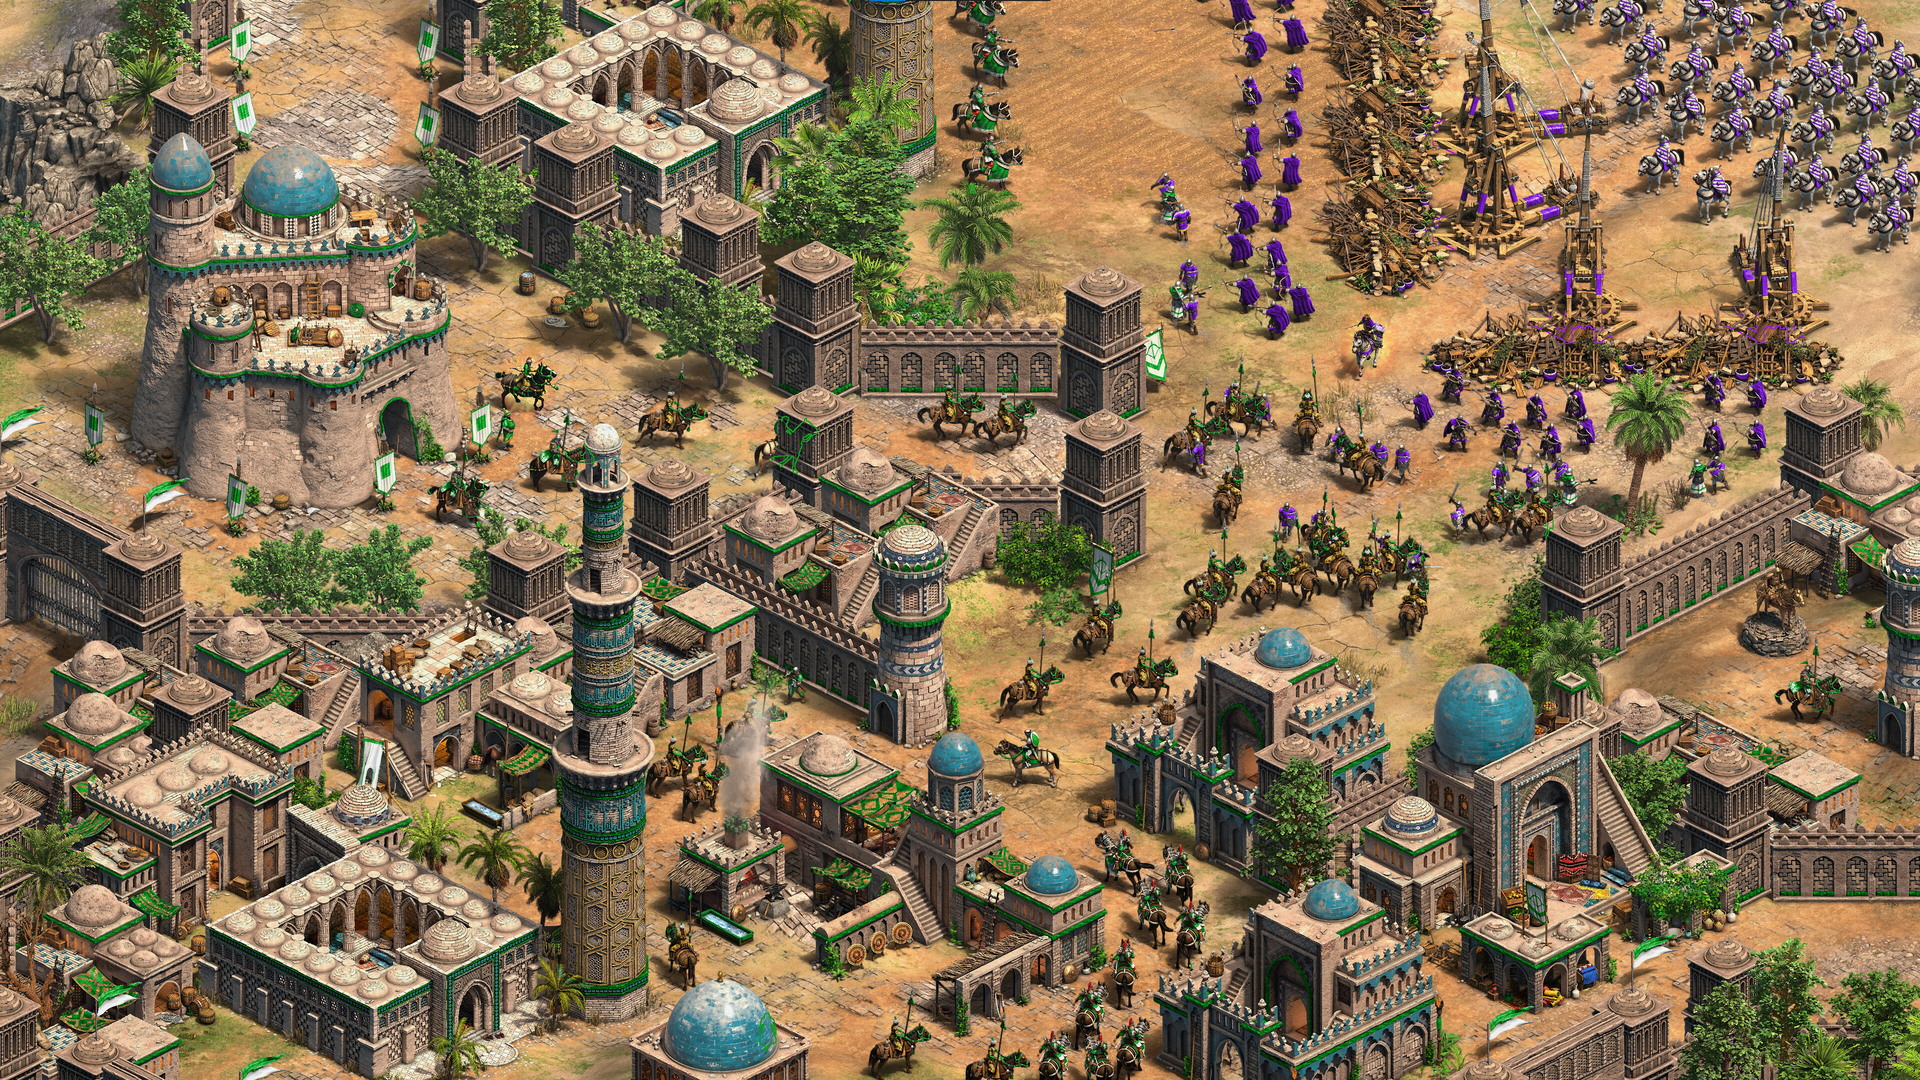 Age of Empires II: Definitive Edition - The Mountain Royals - screenshot 2